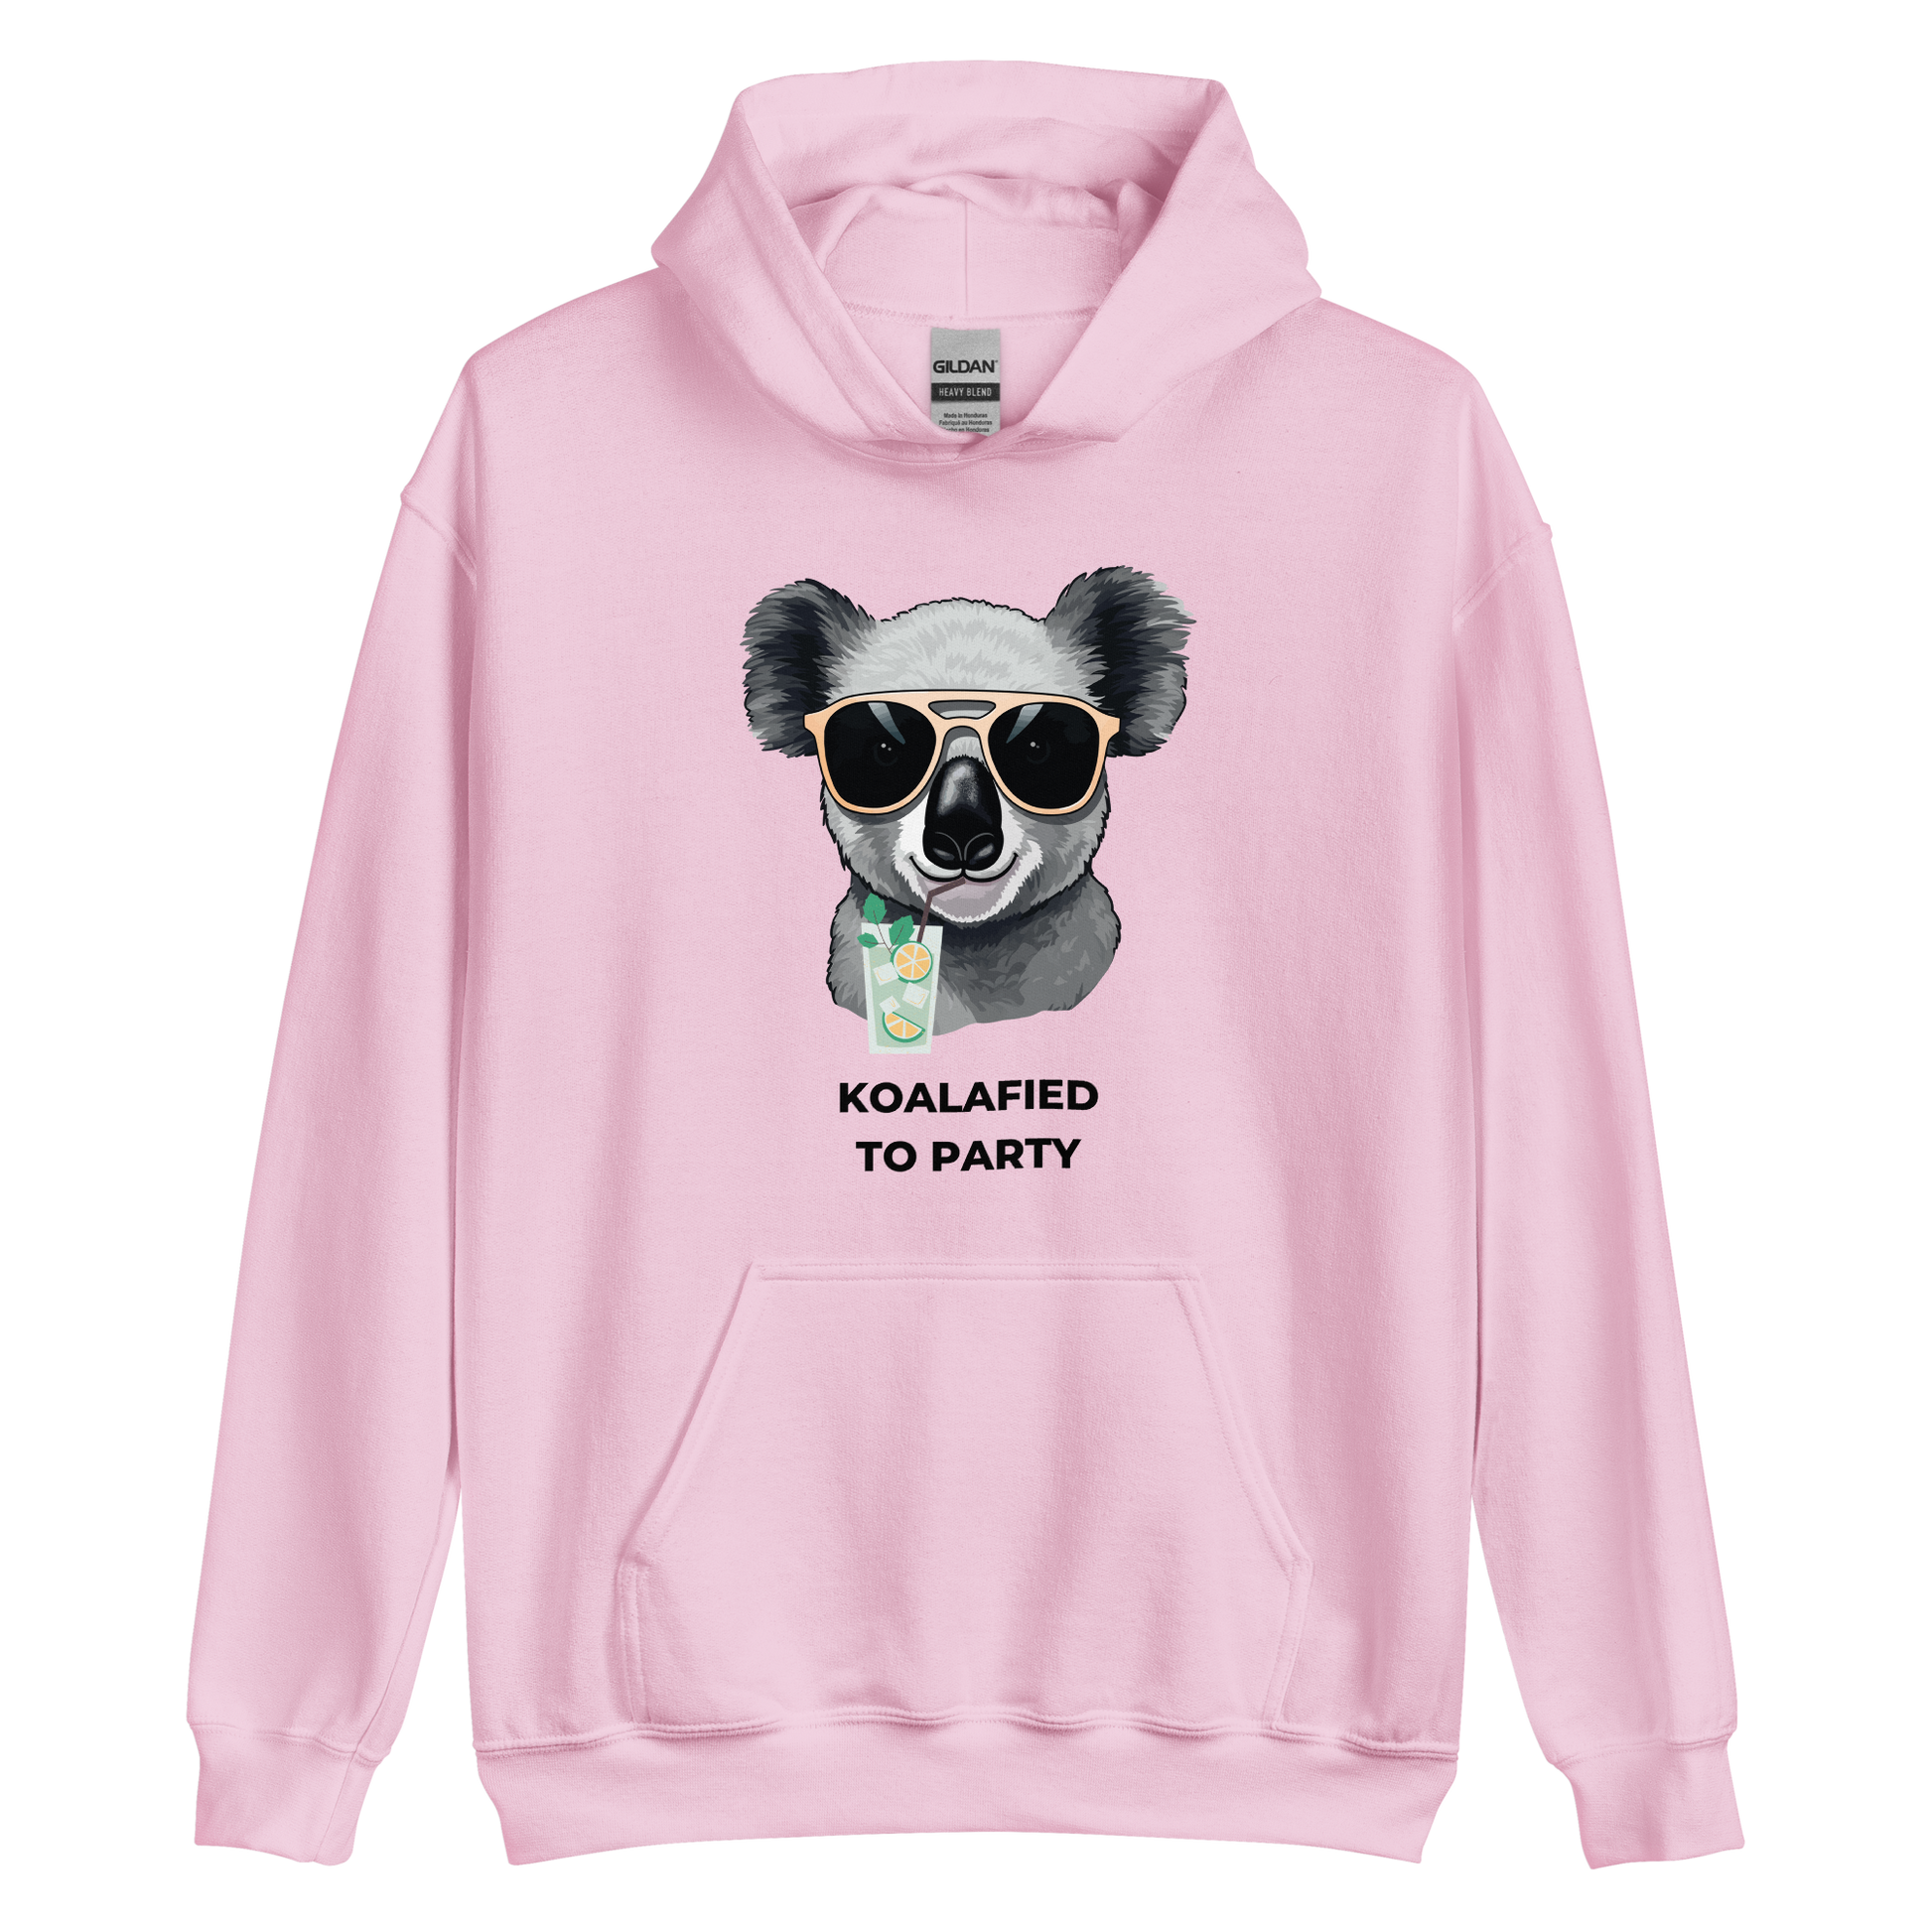 Light Pink Koala Hoodie featuring a captivating Koalafied To Party graphic on the chest - Funny Graphic Koala Hoodies - Boozy Fox